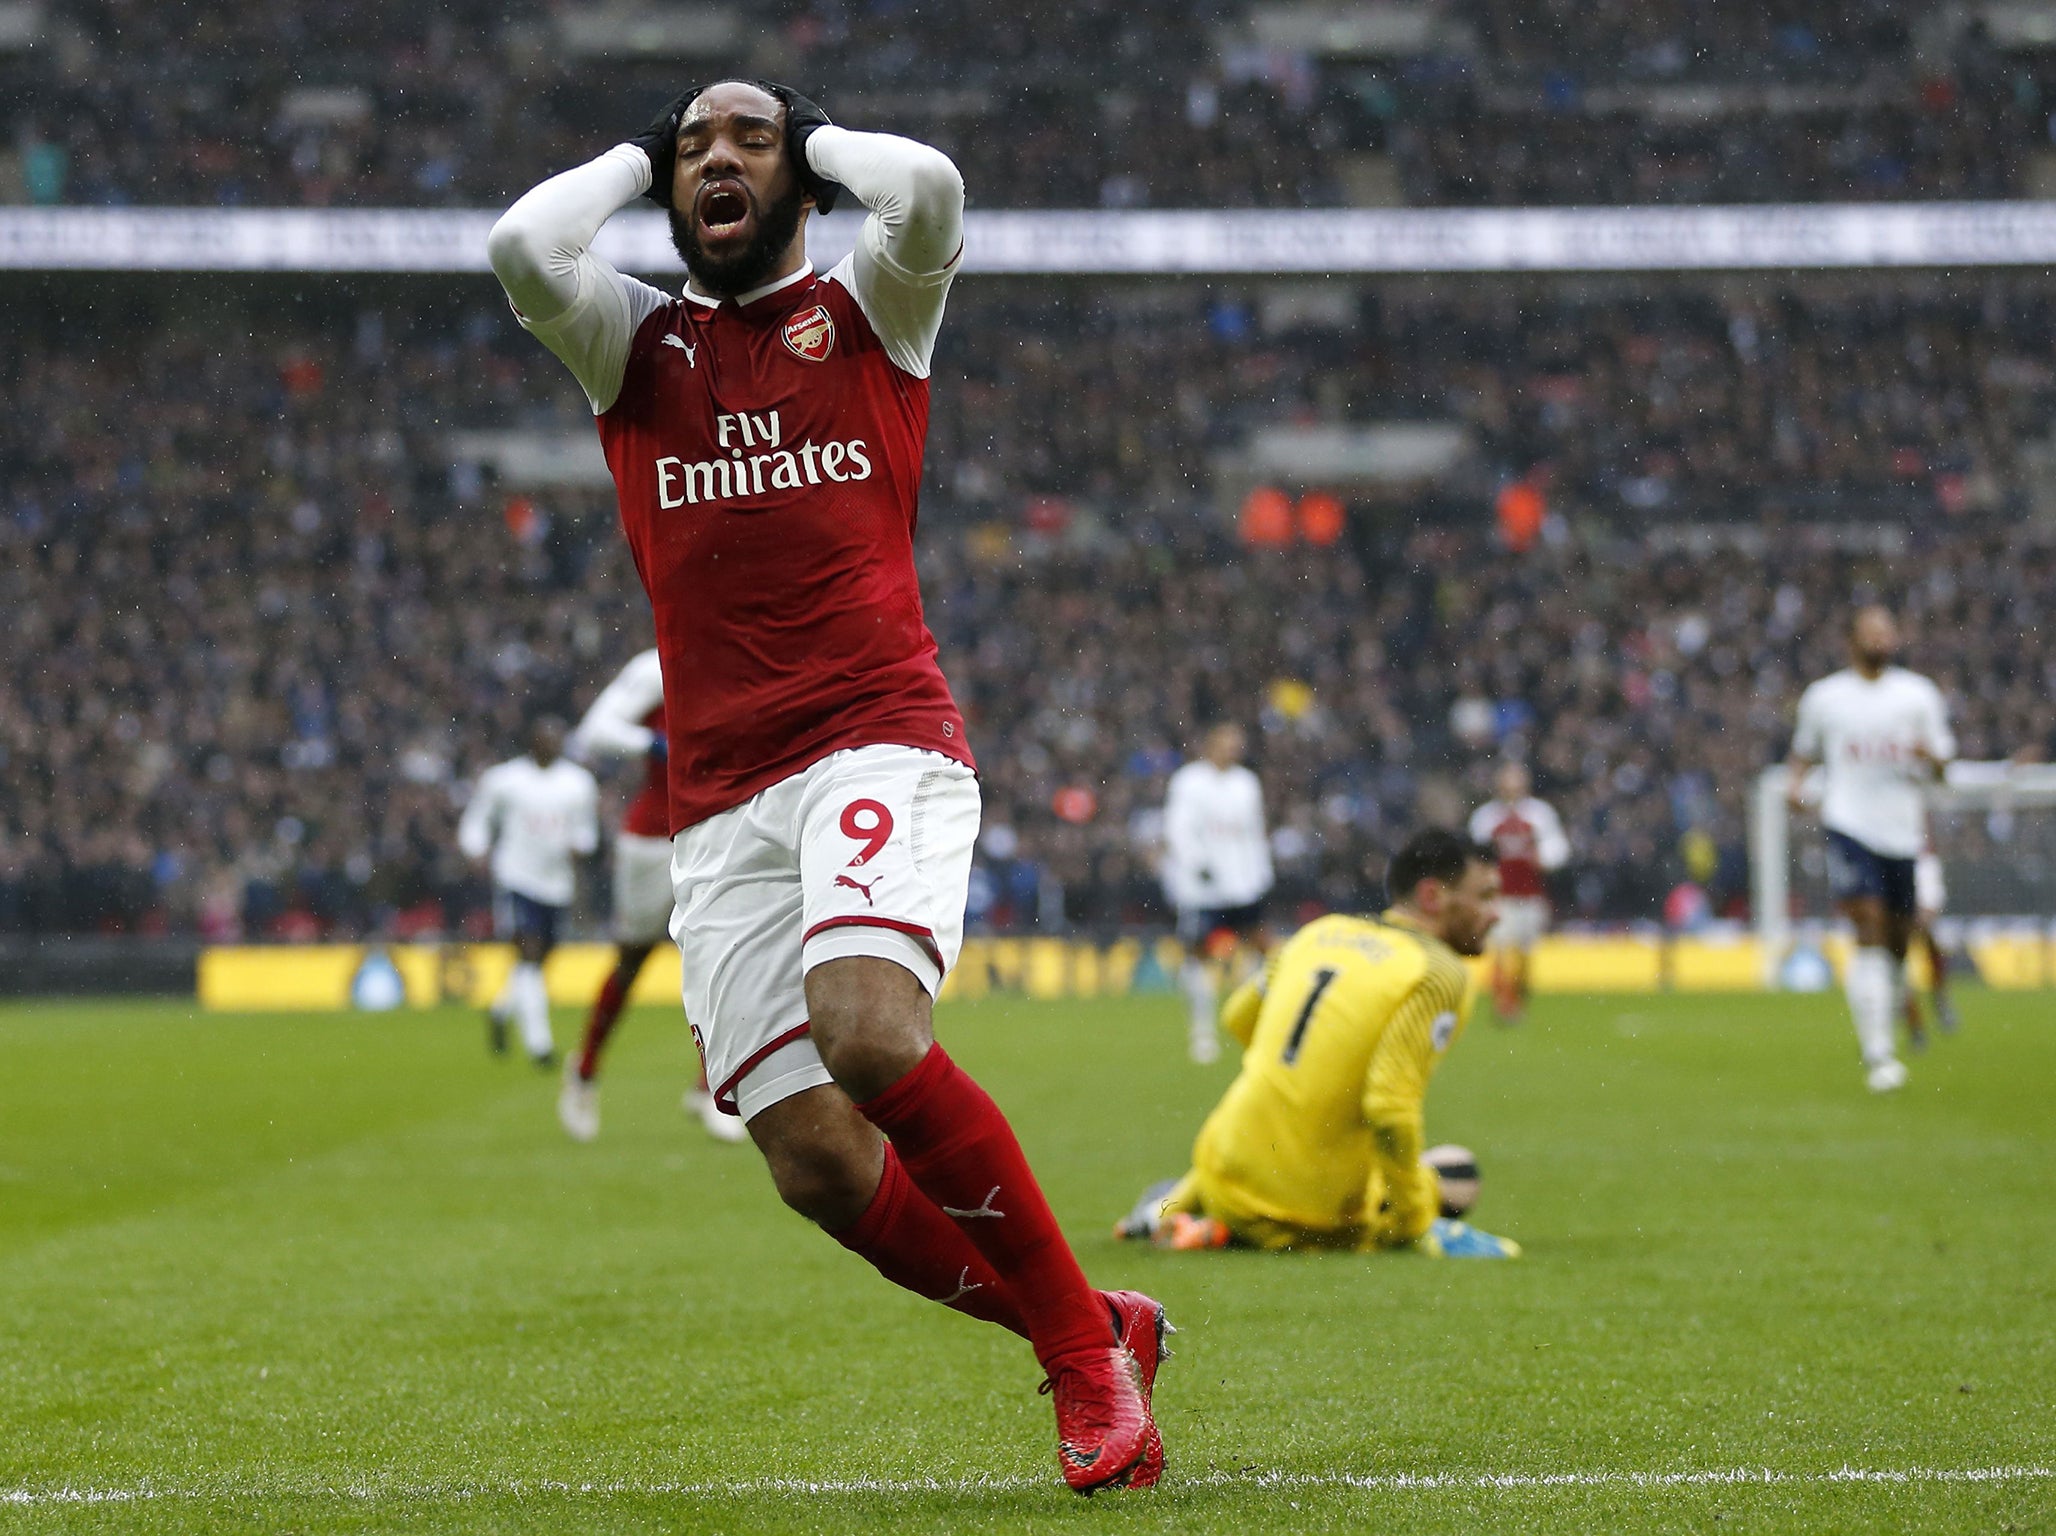 Lacazette spurned a fine chance to level the score in injury time against Spurs